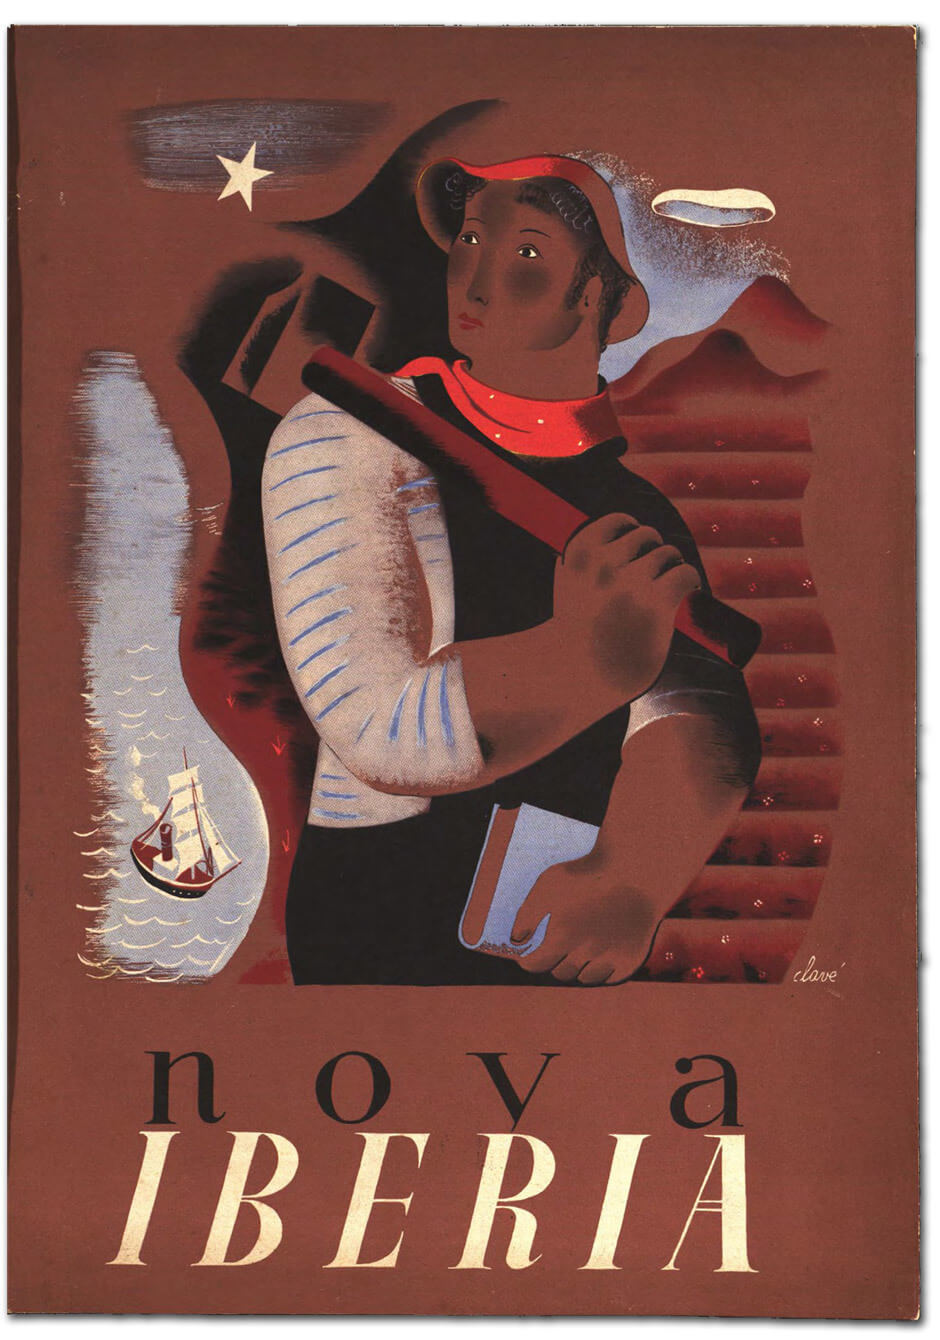 Art Canada Institute, over of the first issue of the anti-fascist Spanish publication Nova Iberia (January 1937)